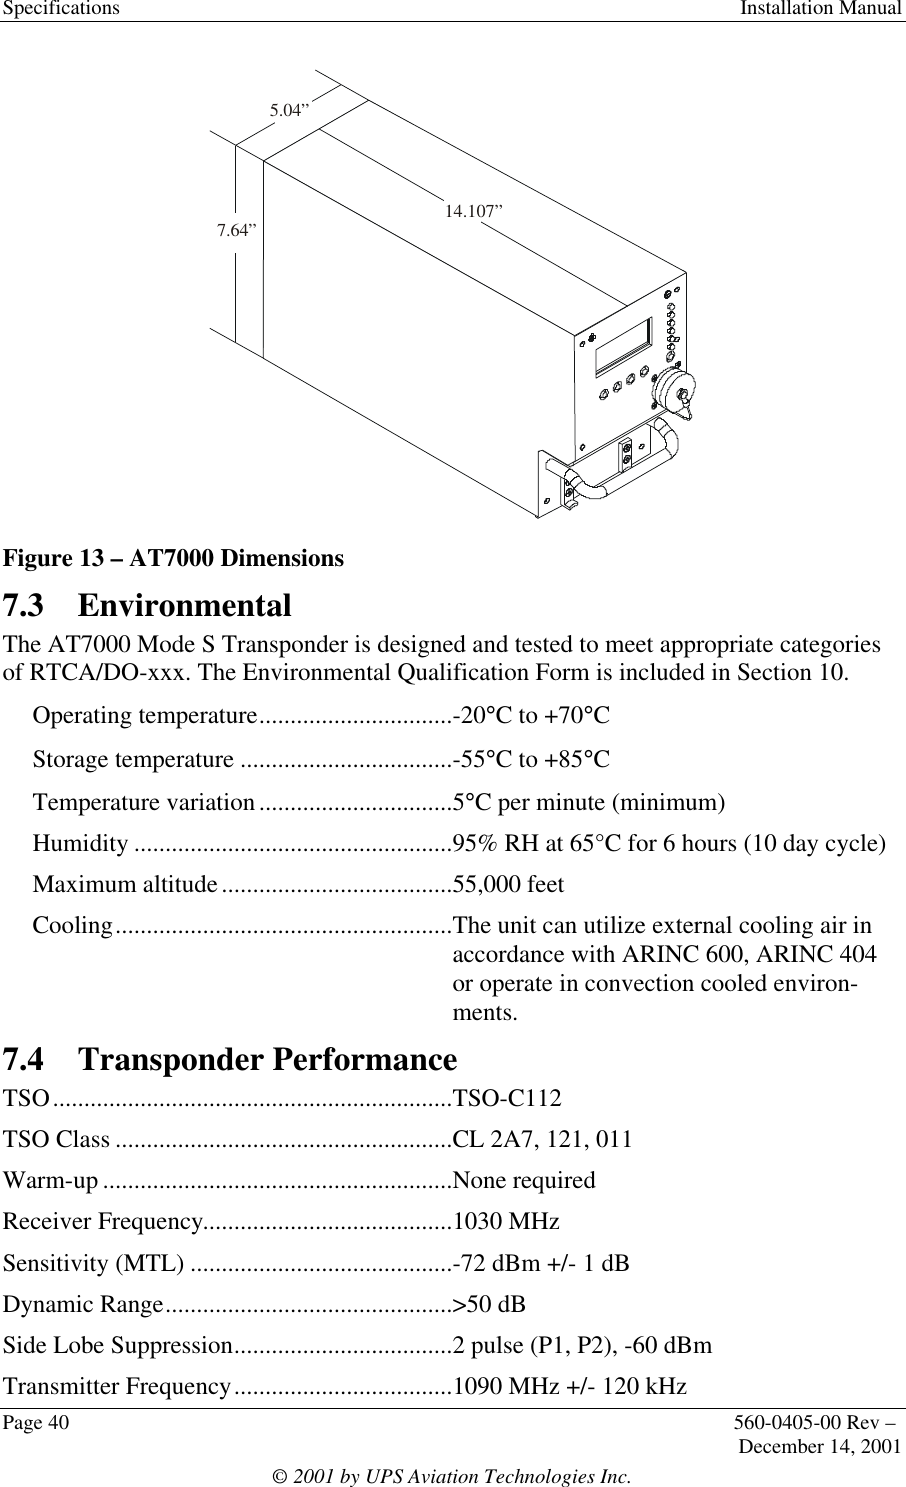 Specifications  Installation ManualPage 40 560-0405-00 Rev –December 14, 2001© 2001 by UPS Aviation Technologies Inc.14.107”5.04”7.64”Figure 13 – AT7000 Dimensions7.3 EnvironmentalThe AT7000 Mode S Transponder is designed and tested to meet appropriate categoriesof RTCA/DO-xxx. The Environmental Qualification Form is included in Section 10.Operating temperature...............................-20°C to +70°CStorage temperature ..................................-55°C to +85°CTemperature variation...............................5°C per minute (minimum)Humidity ...................................................95% RH at 65°C for 6 hours (10 day cycle)Maximum altitude.....................................55,000 feetCooling......................................................The unit can utilize external cooling air inaccordance with ARINC 600, ARINC 404or operate in convection cooled environ-ments.7.4 Transponder PerformanceTSO................................................................TSO-C112TSO Class ......................................................CL 2A7, 121, 011Warm-up ........................................................None requiredReceiver Frequency........................................1030 MHzSensitivity (MTL) ..........................................-72 dBm +/- 1 dBDynamic Range..............................................&gt;50 dBSide Lobe Suppression...................................2 pulse (P1, P2), -60 dBmTransmitter Frequency...................................1090 MHz +/- 120 kHz